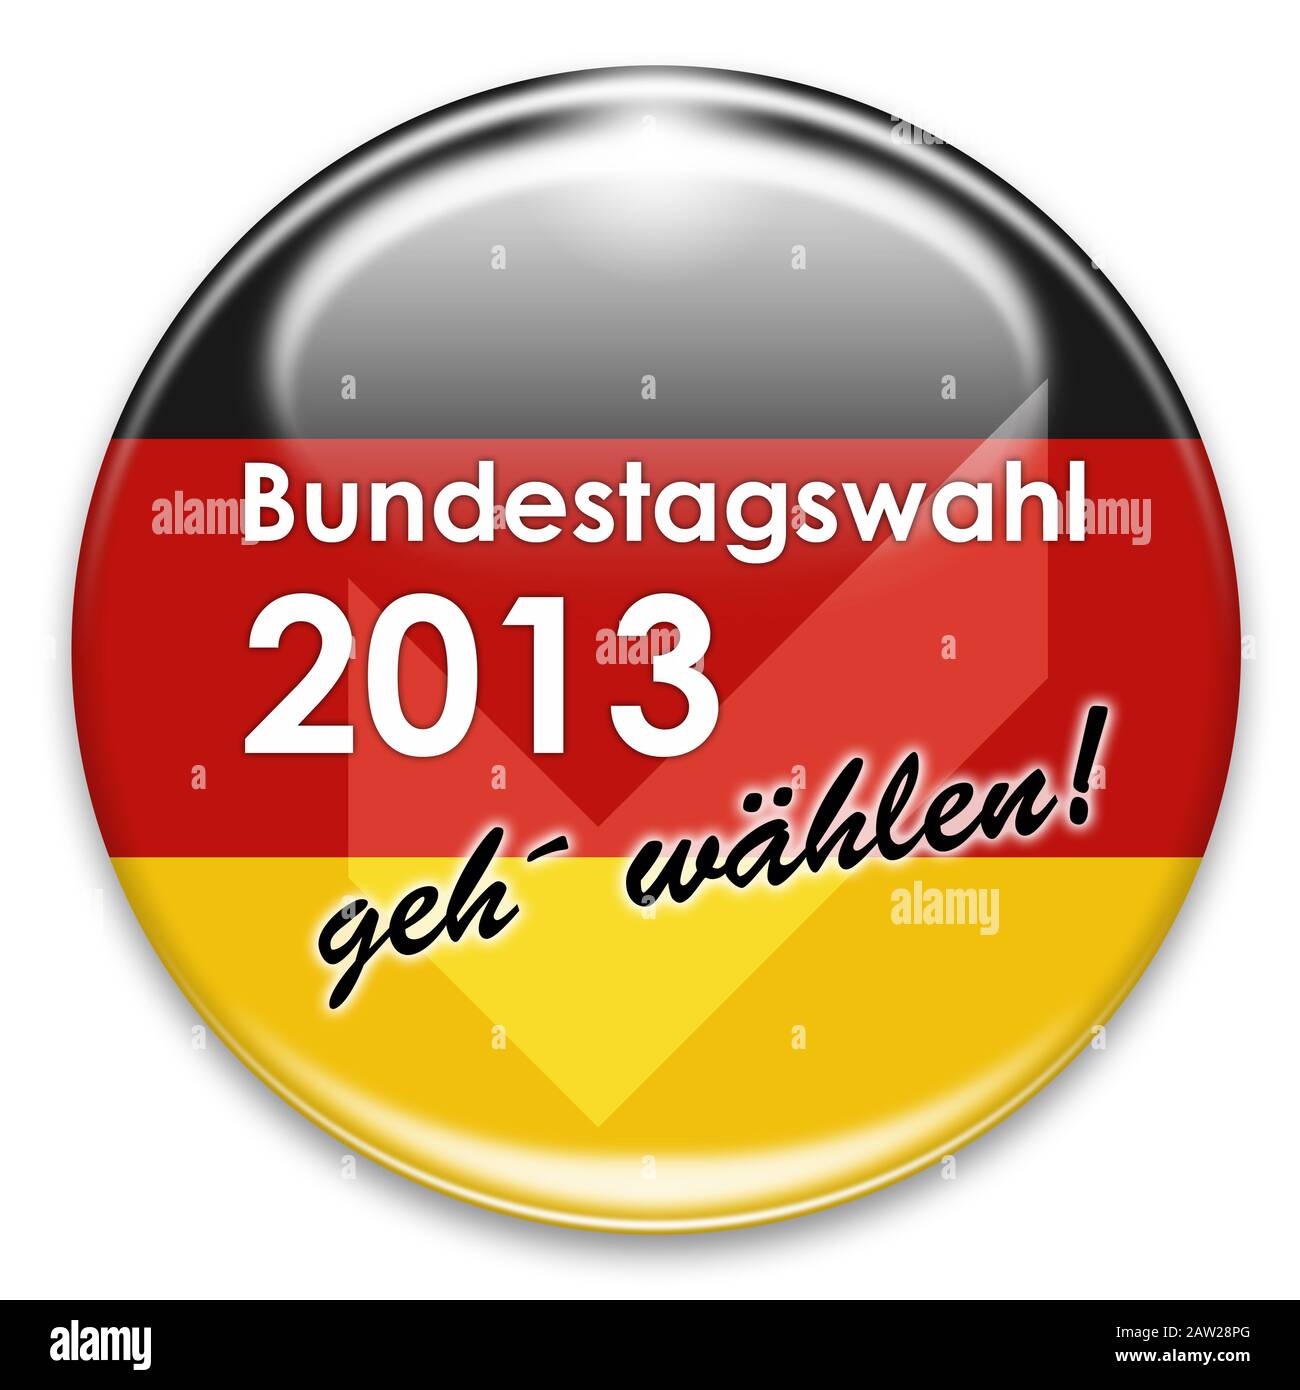 Button labeled with 'go vote' for the German Bundestagswahl election in 2013, isolated on white background. Stock Photo